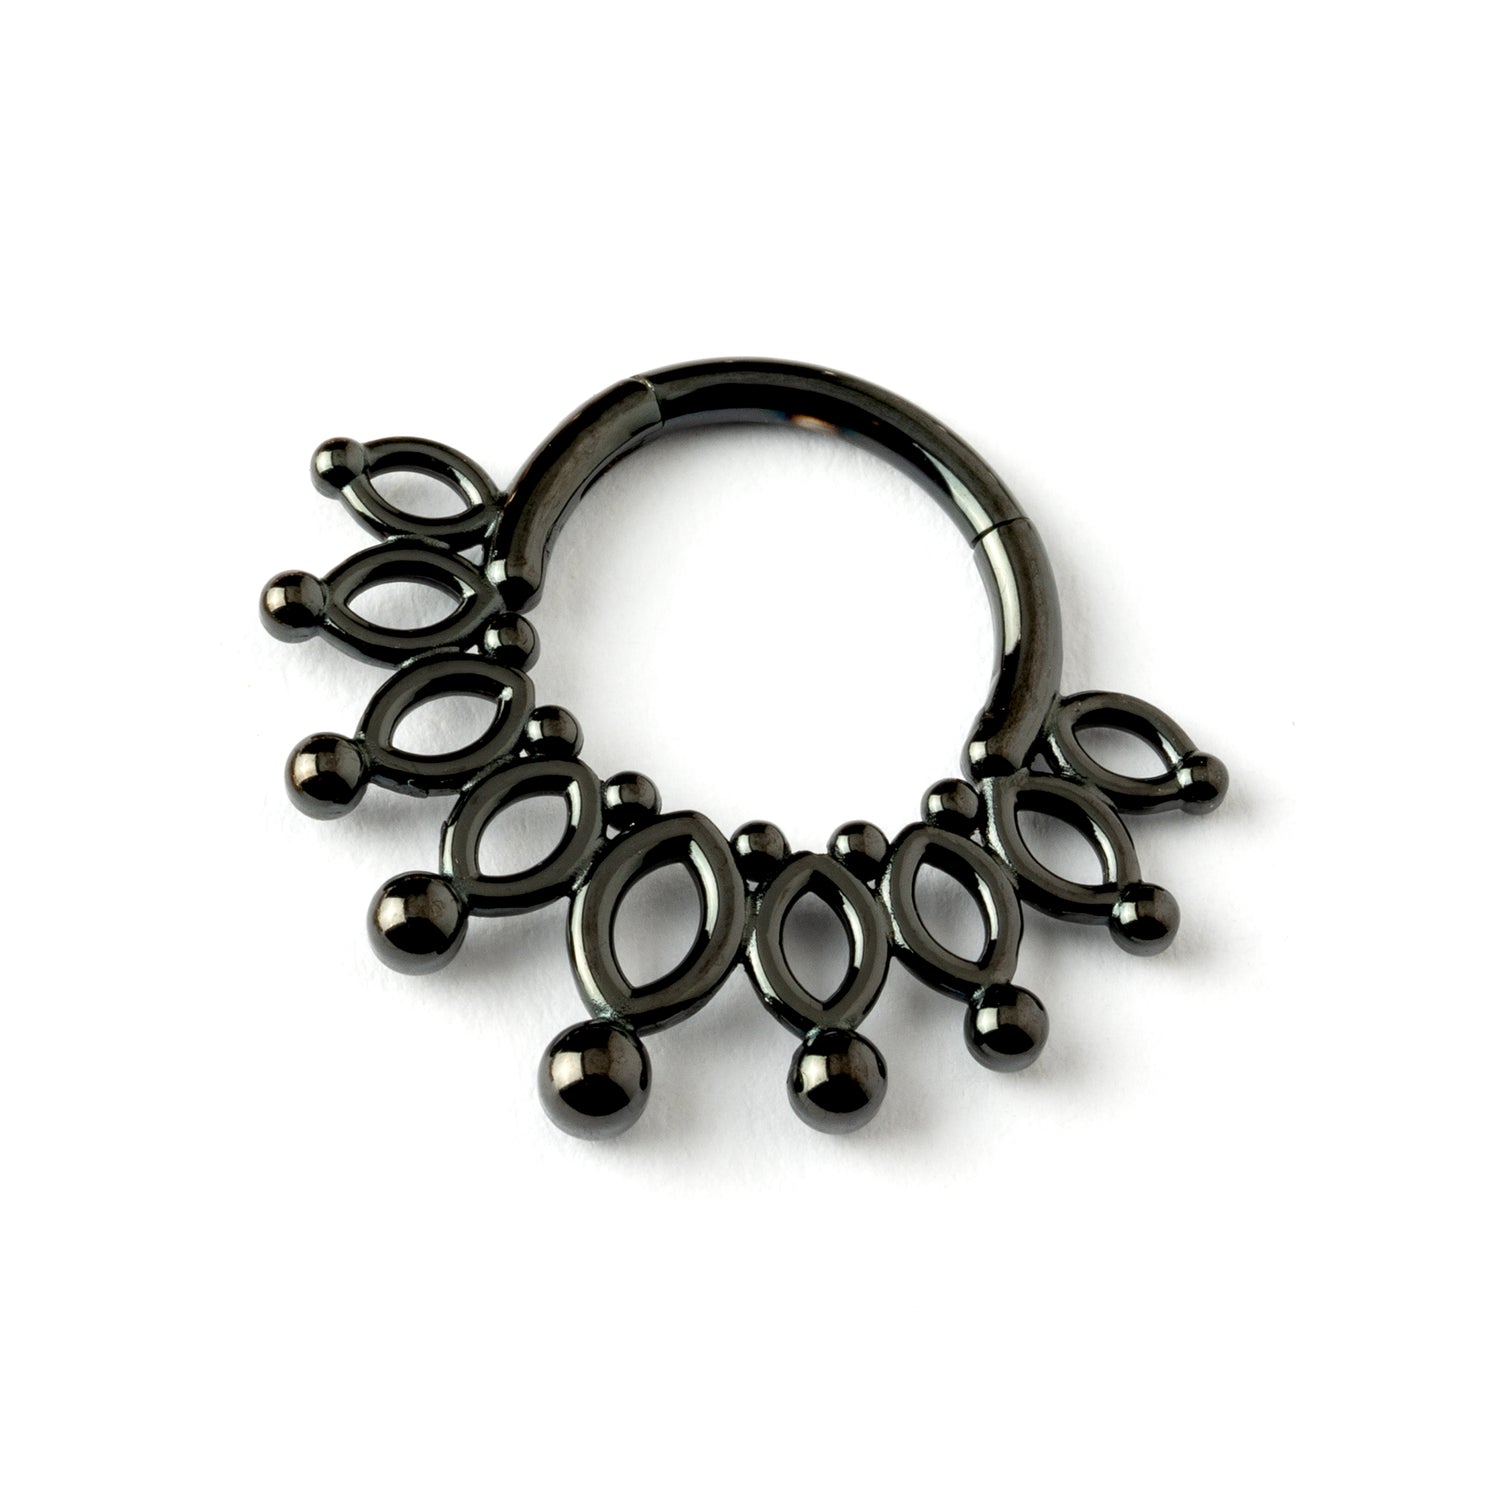 Anastasia black surgical steel flower petals septum clicker right side view